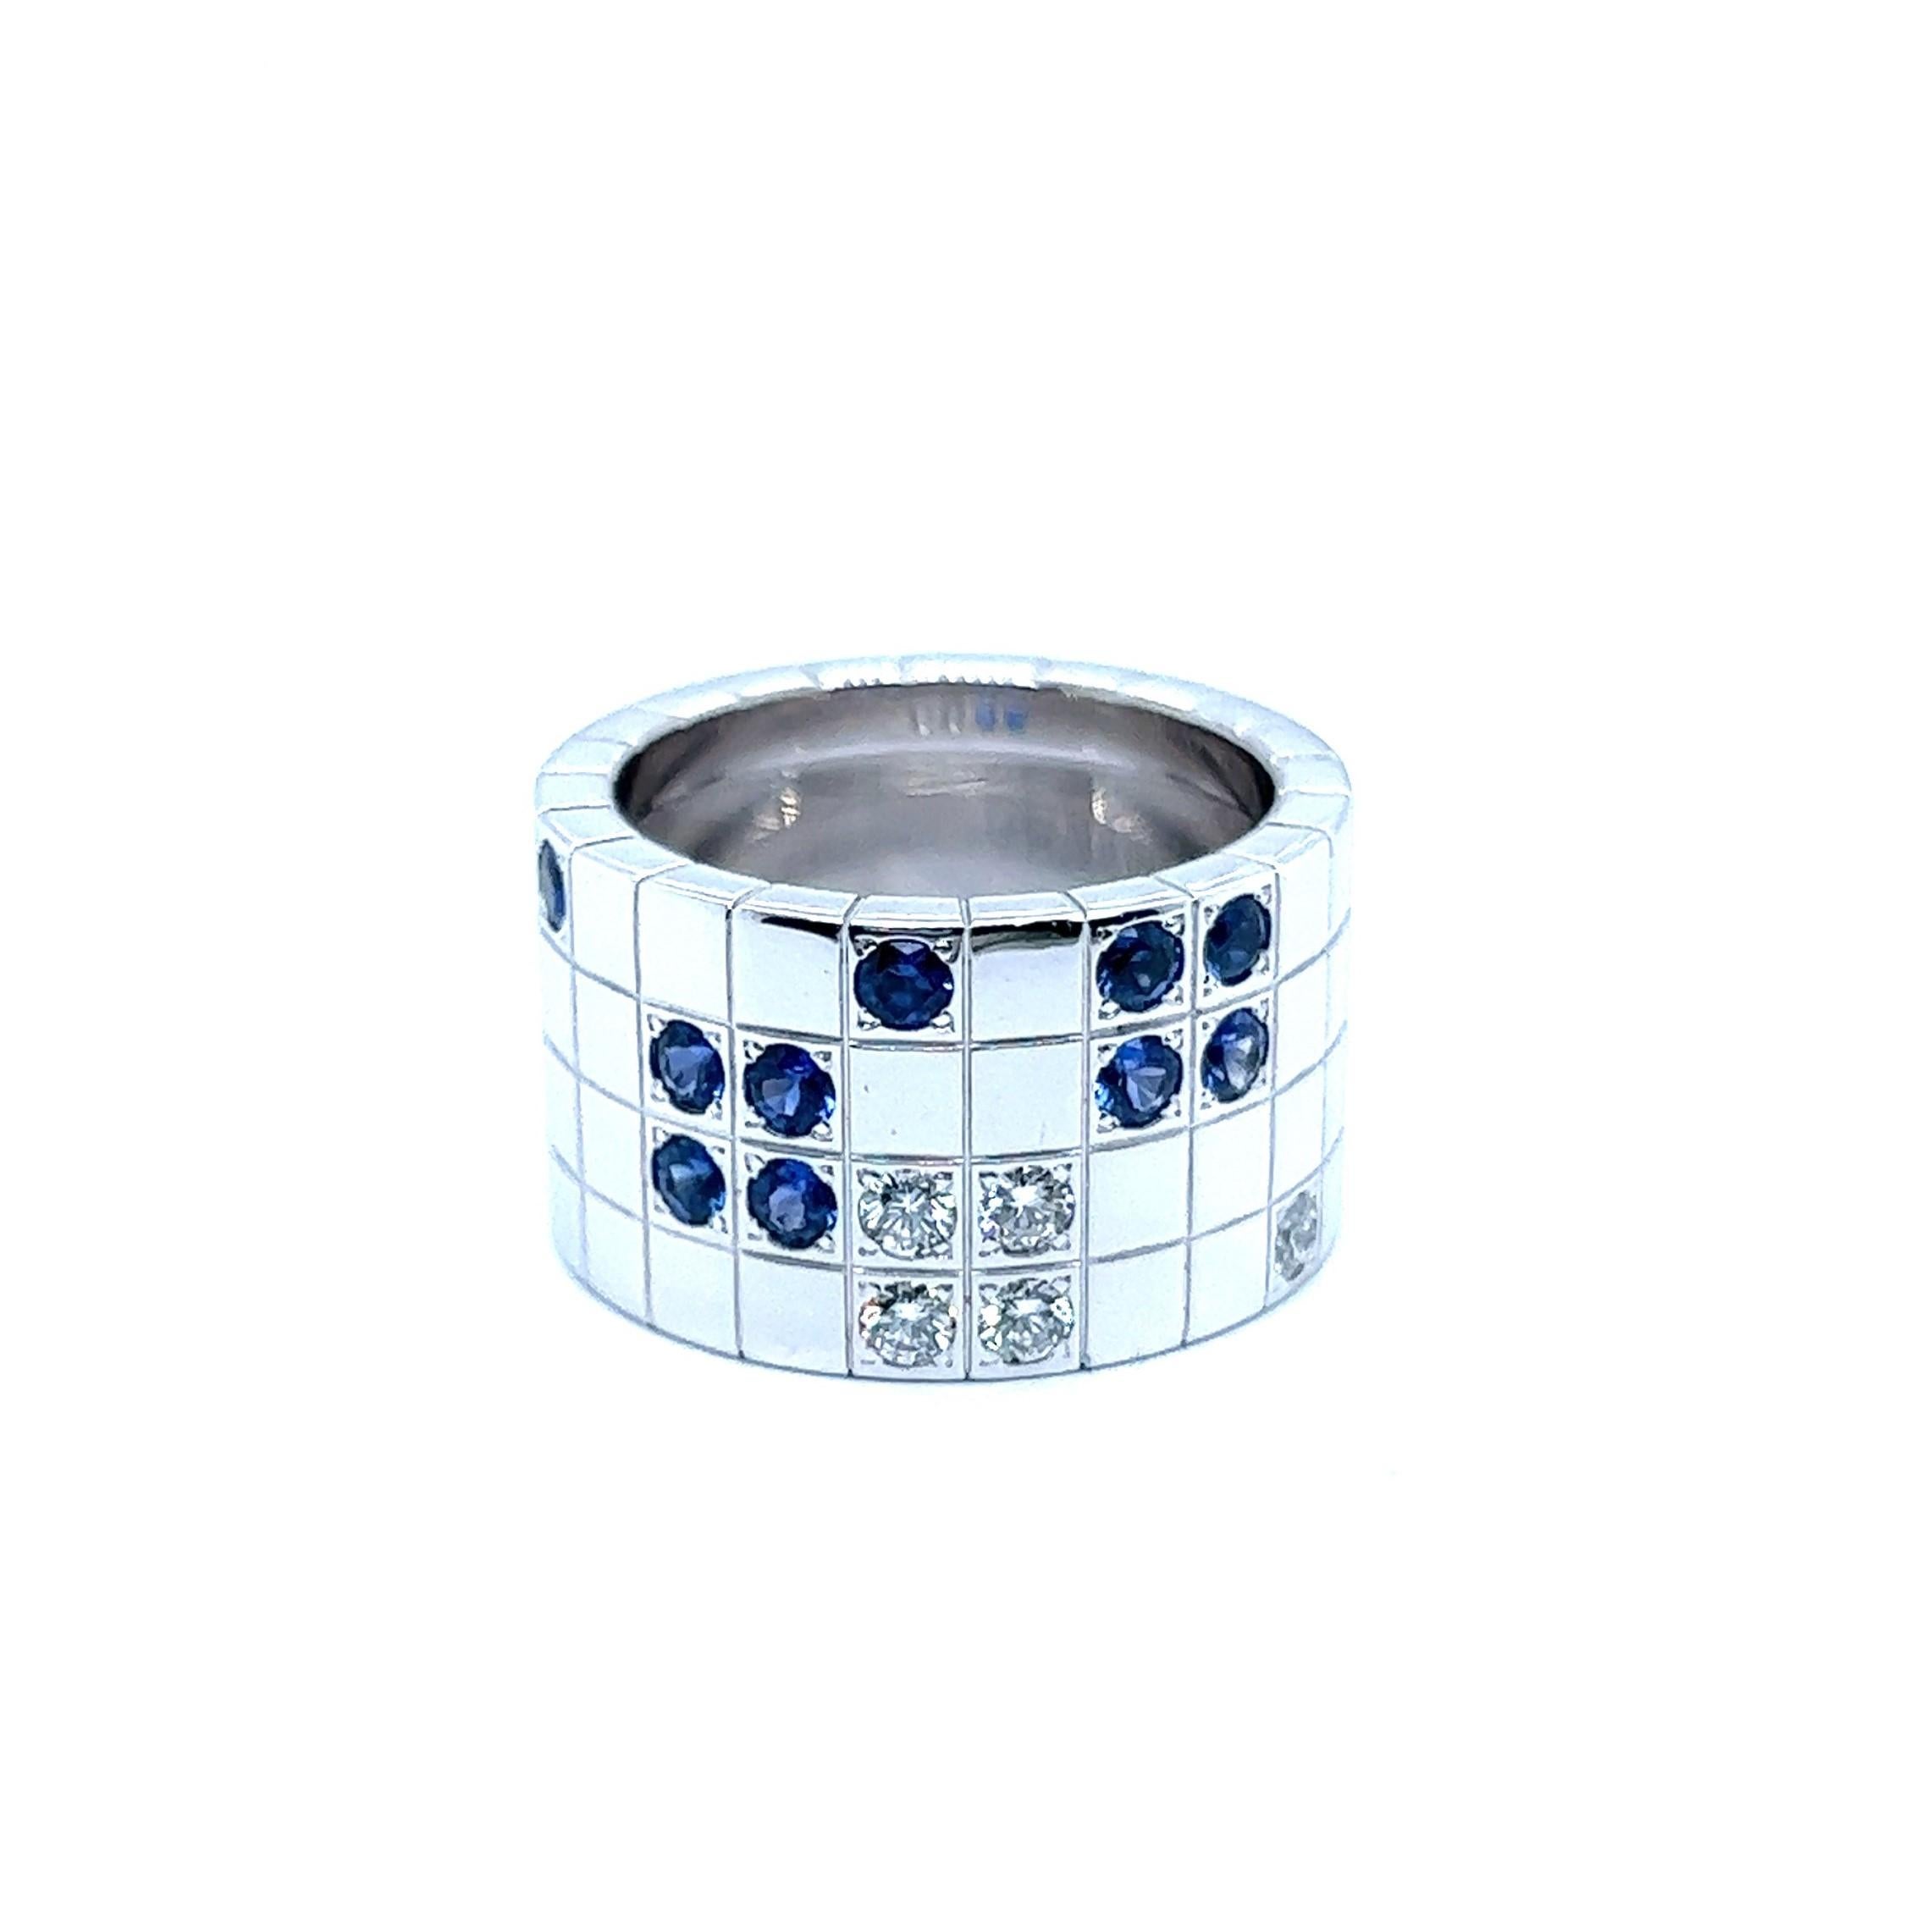 Artist Cartier Lanière Ring with Sapphires and Diamonds in 18 Karat White Gold For Sale